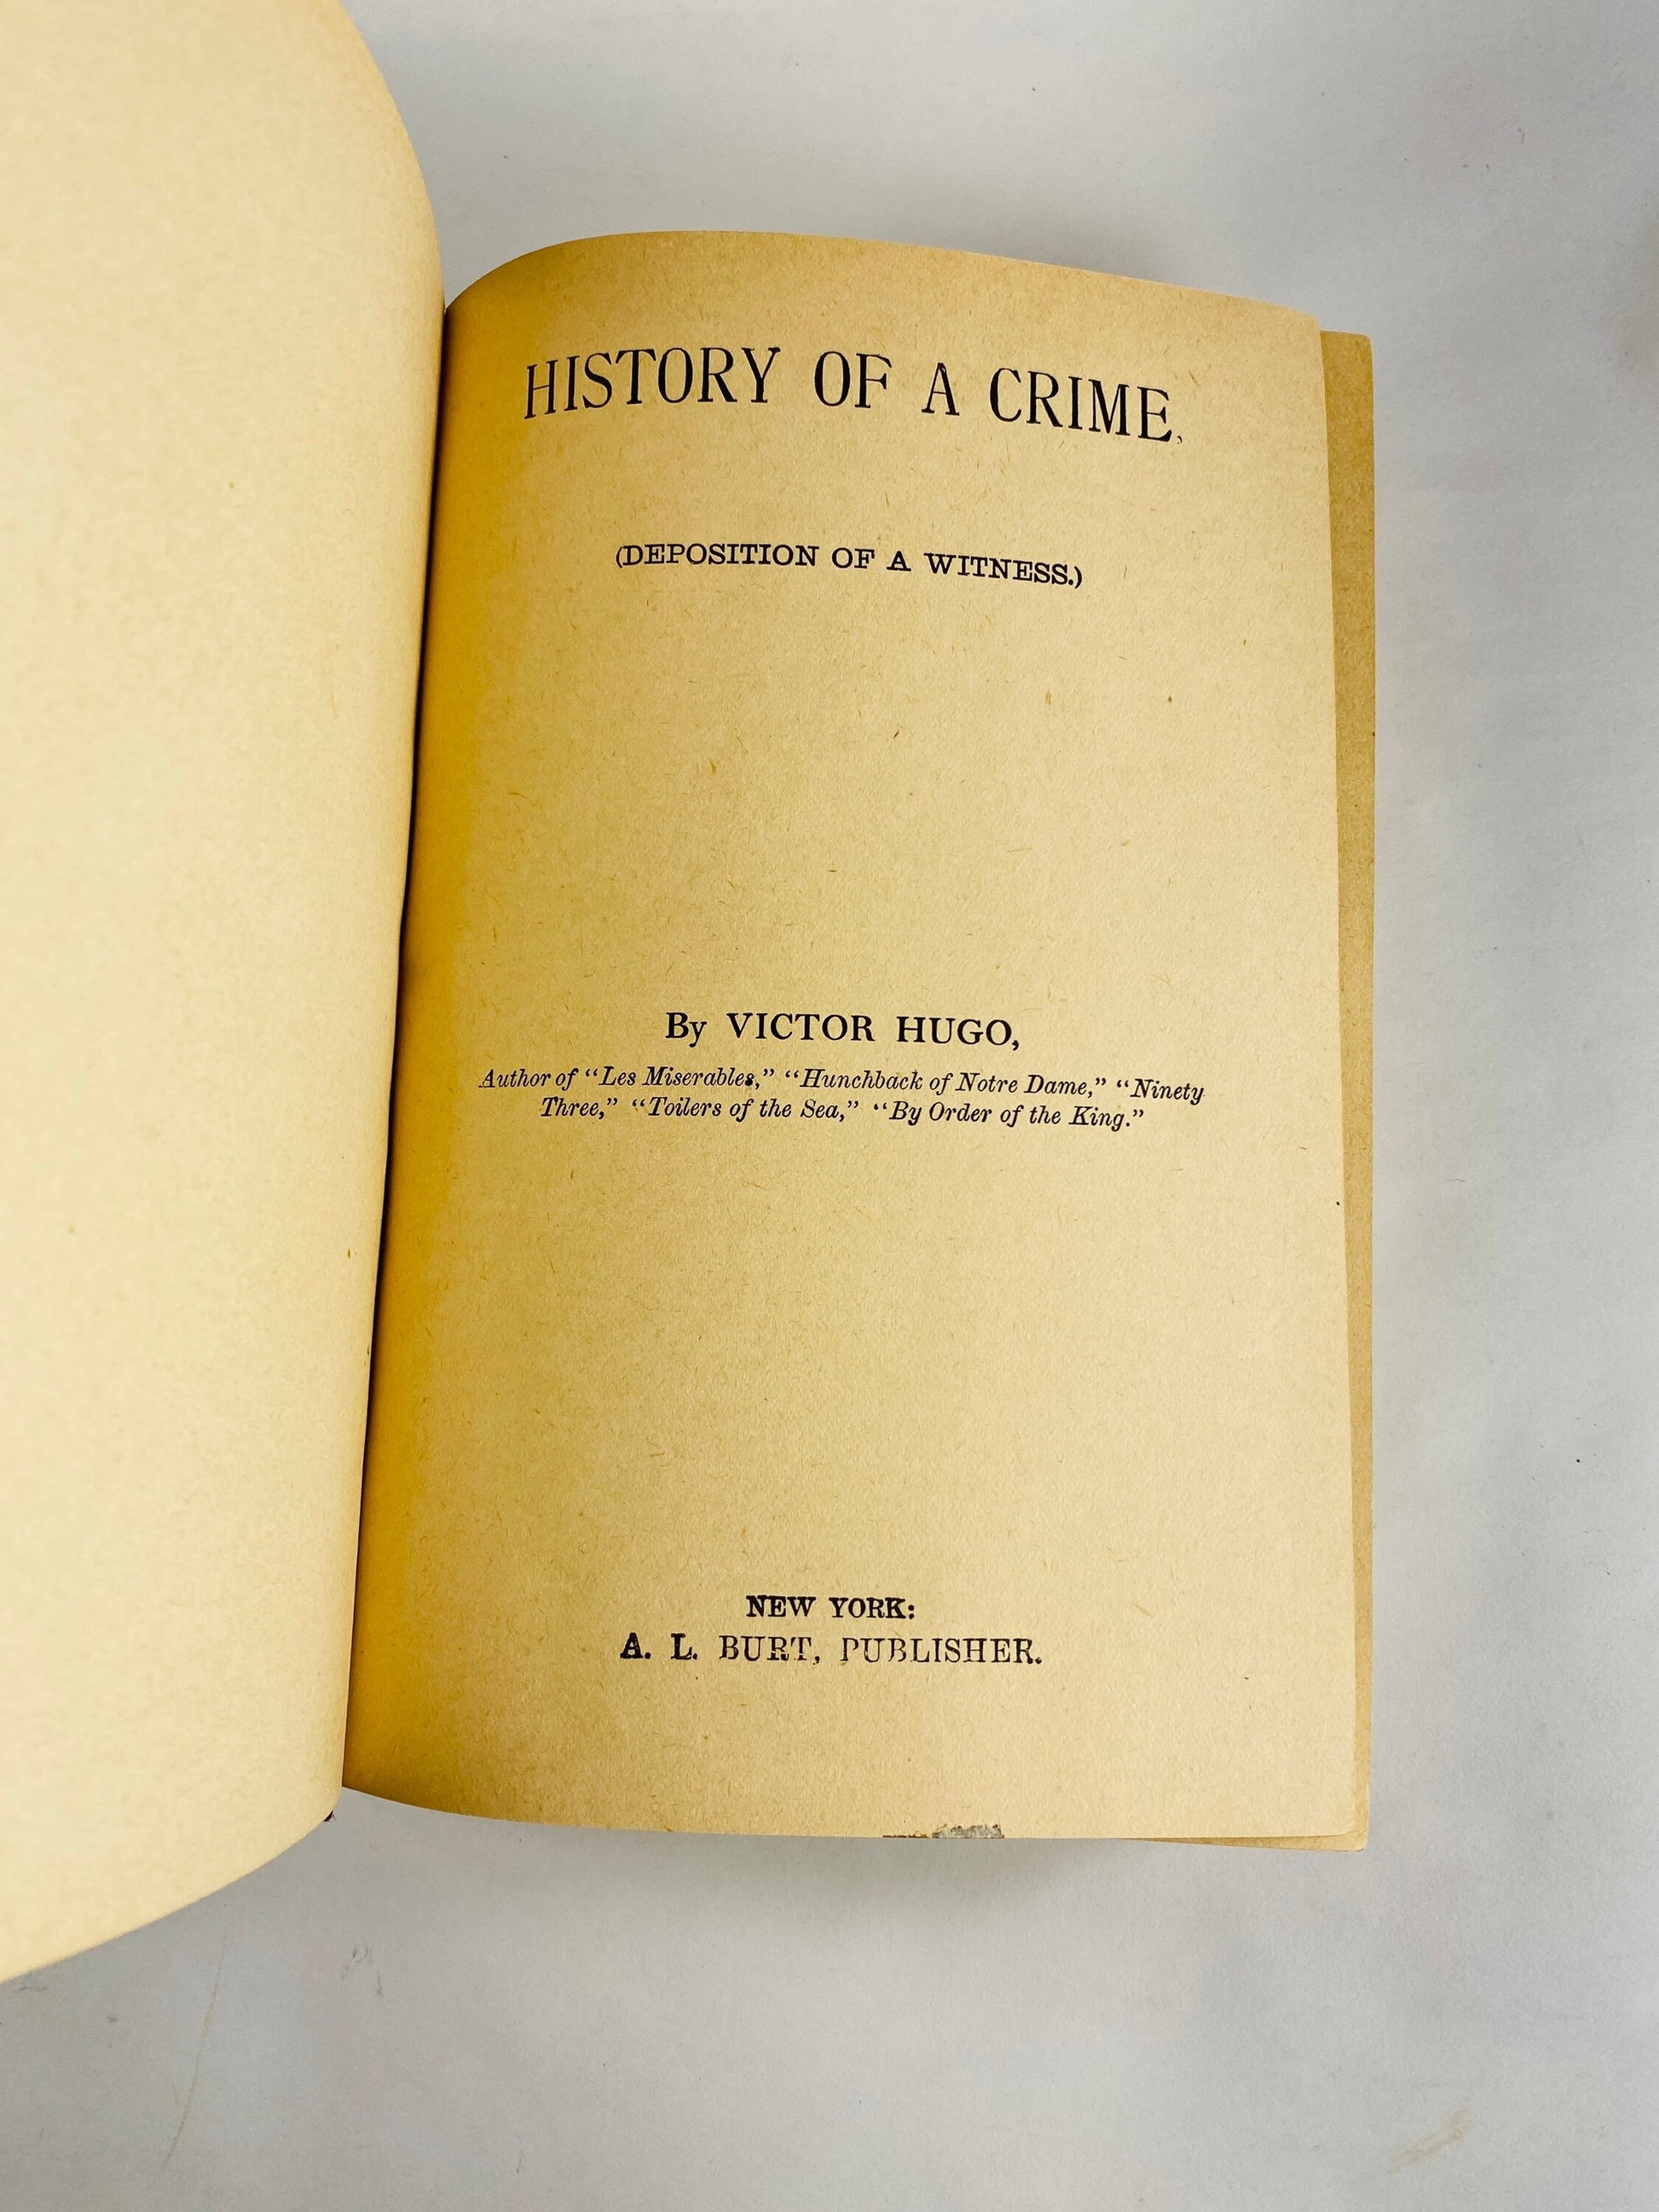 1900 History of a Crime by Victor Hugo author of Les Miserables vintage book EARLY American PRINTING Red bookshelf decor.